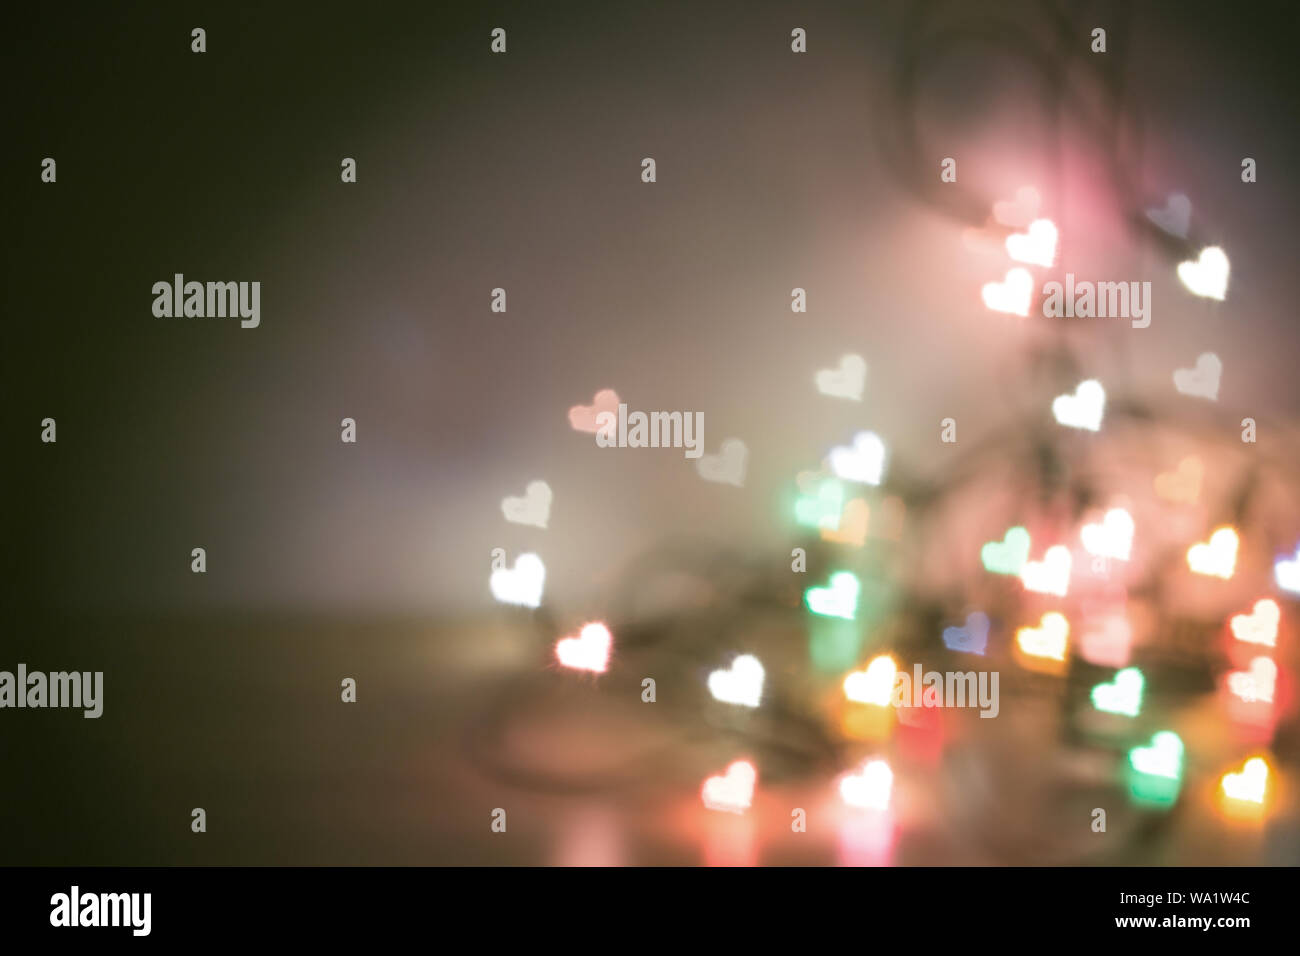 Blur christmas lights with bokeh heart shape light low depth of focus with copy space in concept vintage tone style. Stock Photo